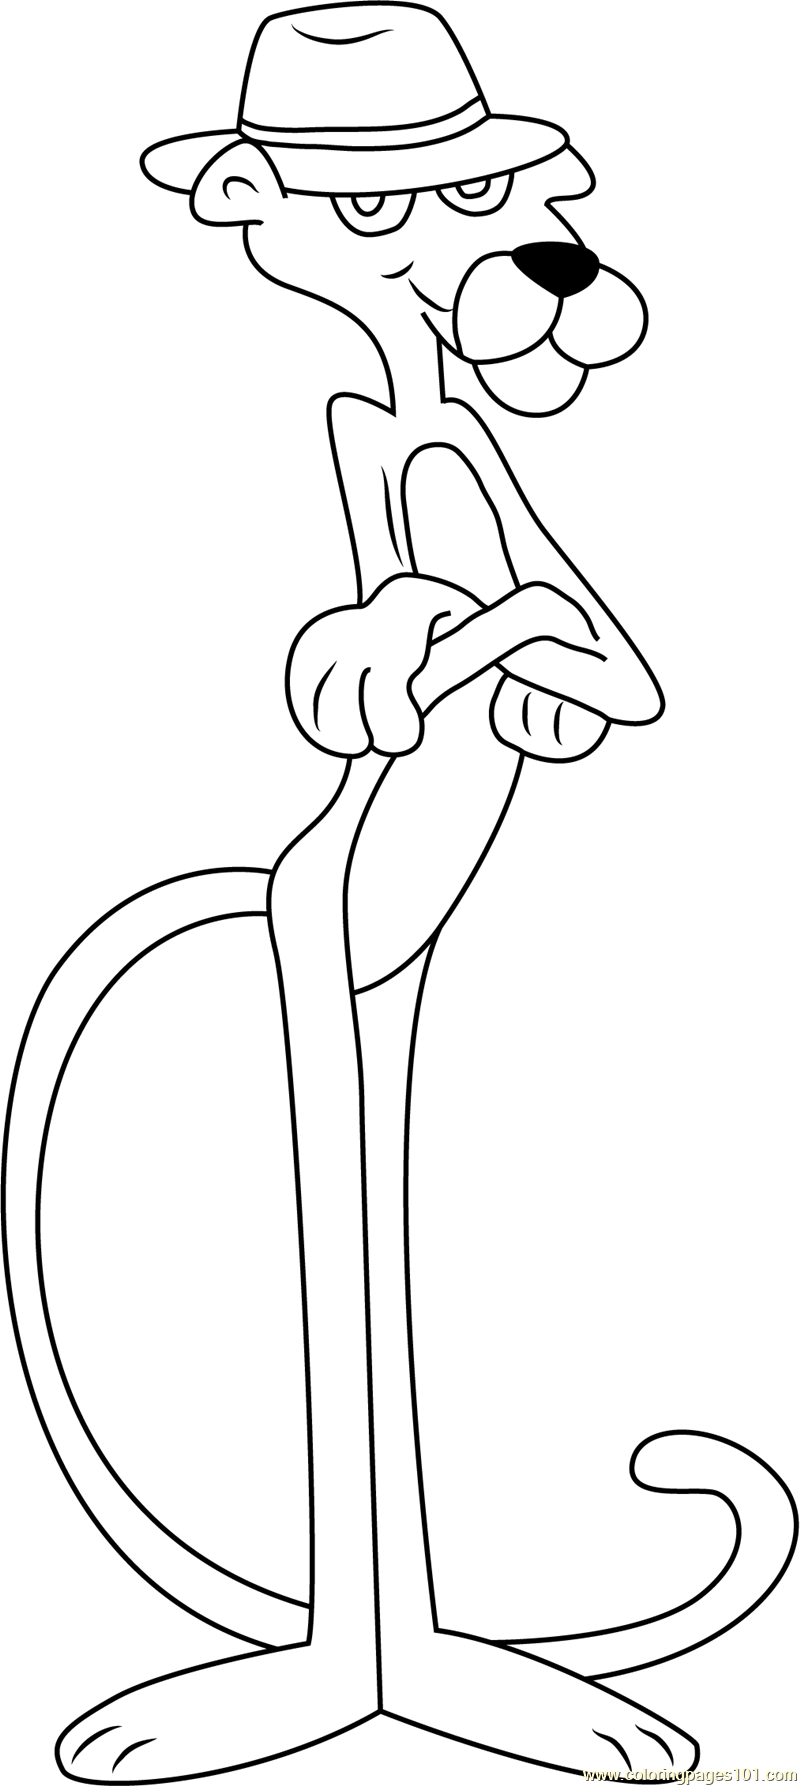 Pink Panther wear Hat Coloring Page - Free The Pink Panther Coloring